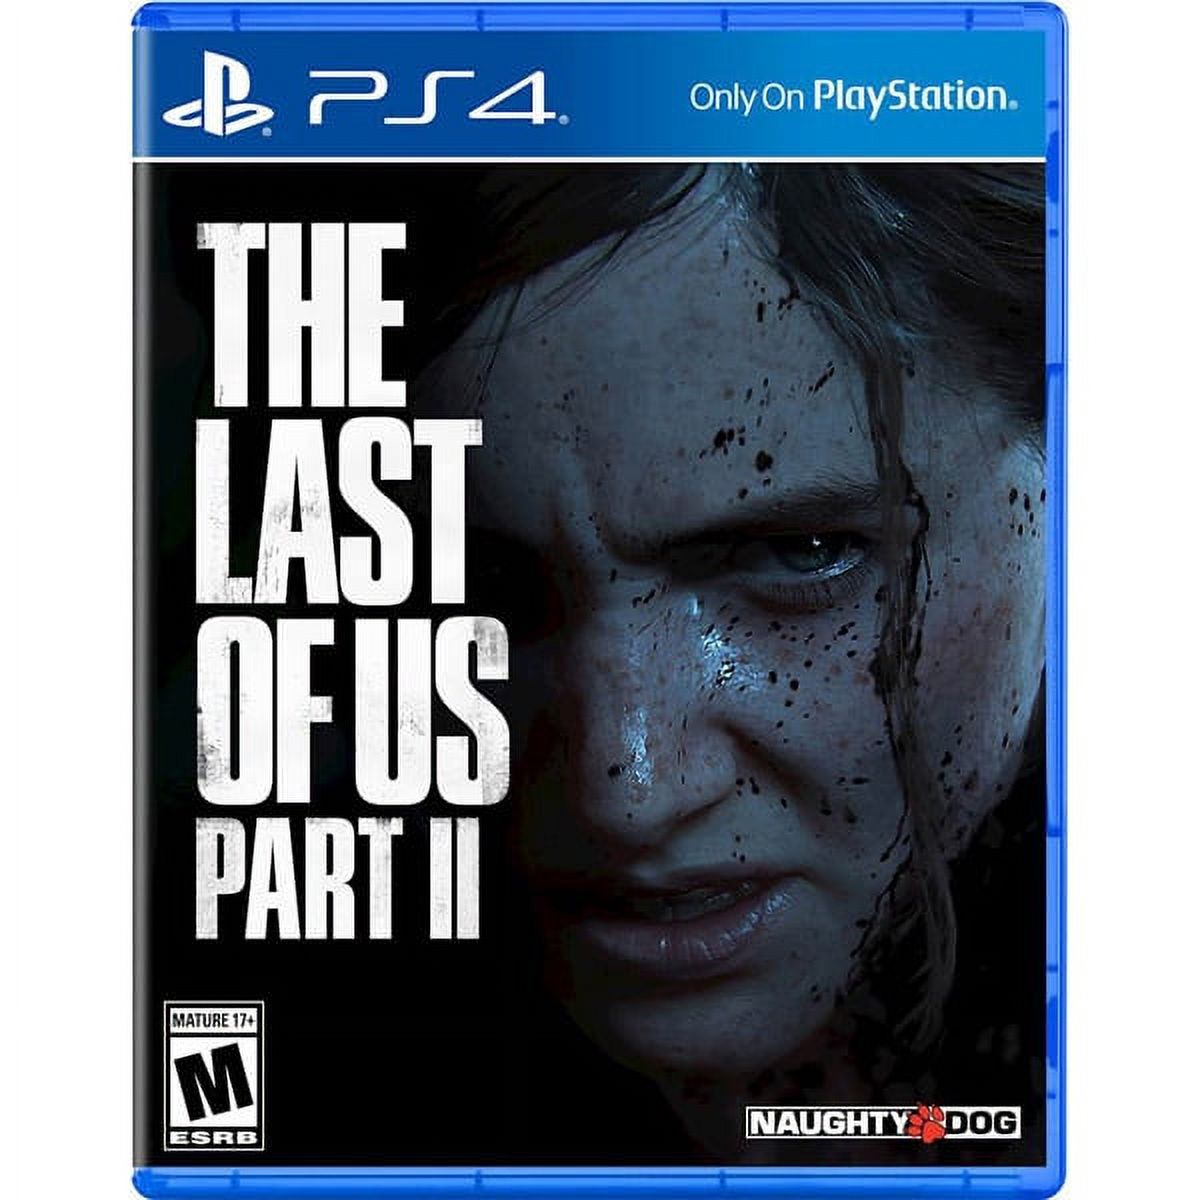 The Last of Us Part ll - PlayStation 4 - image 1 of 6